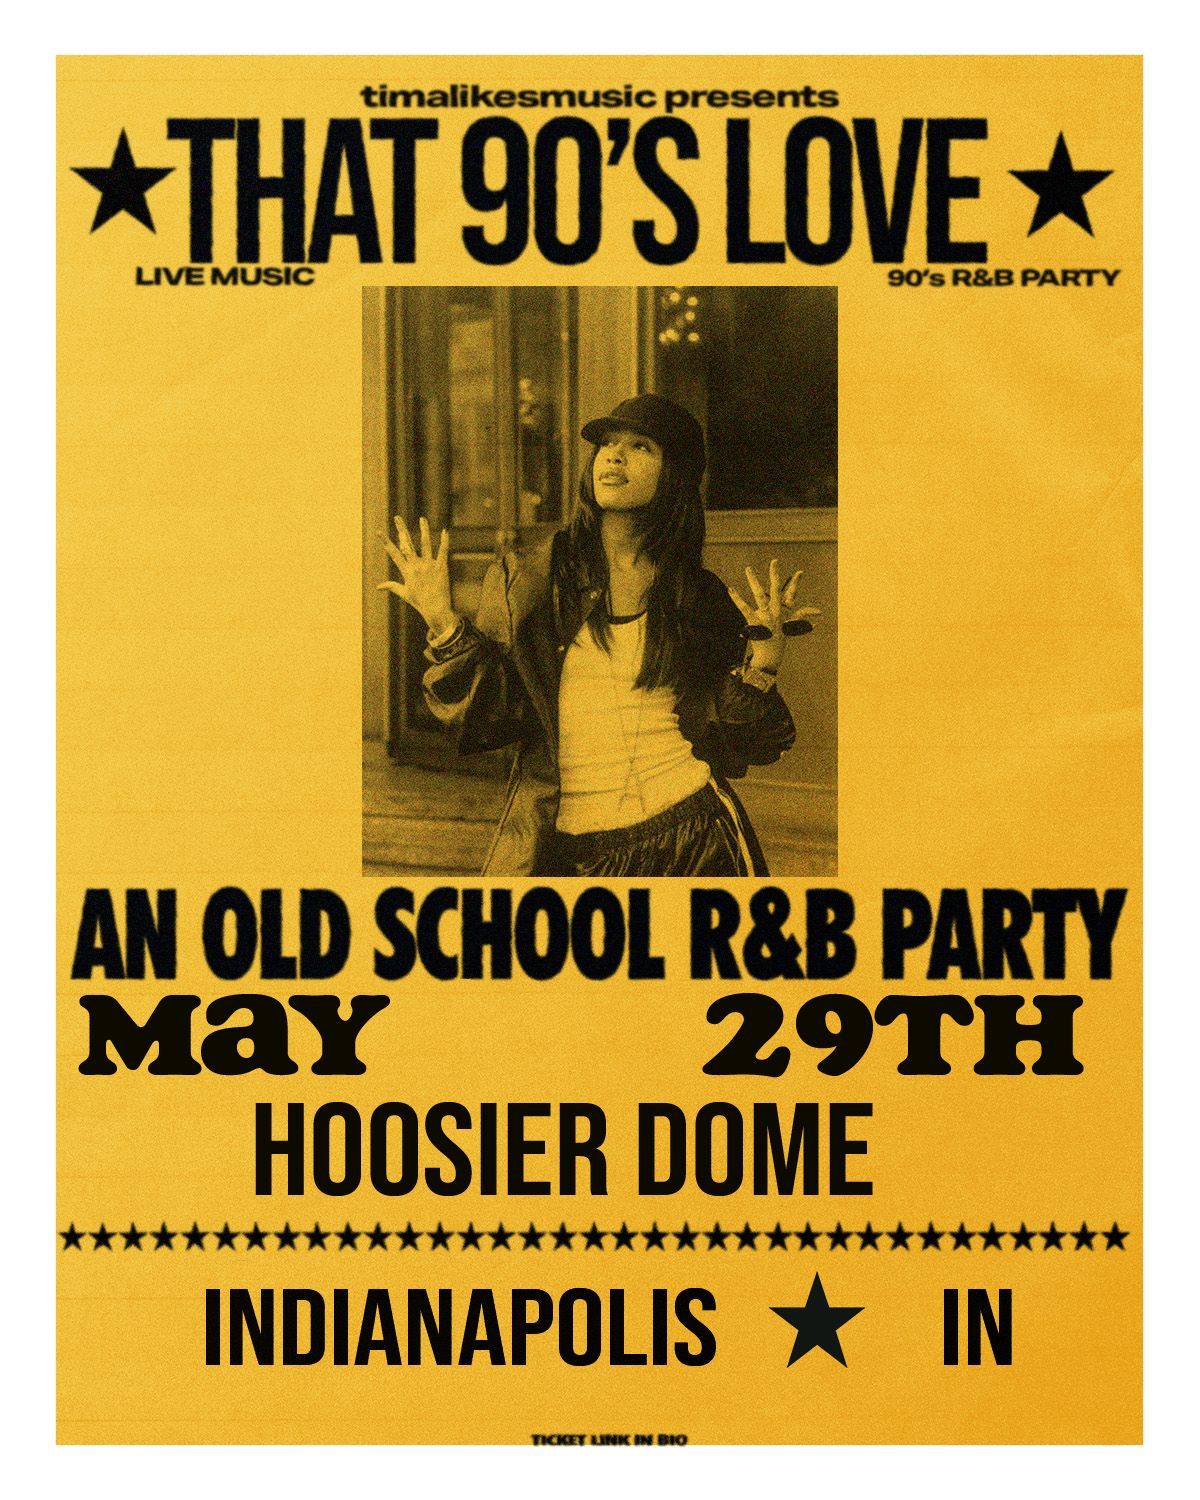 TimaLikesMusic: That 90's Love at Hoosier Dome